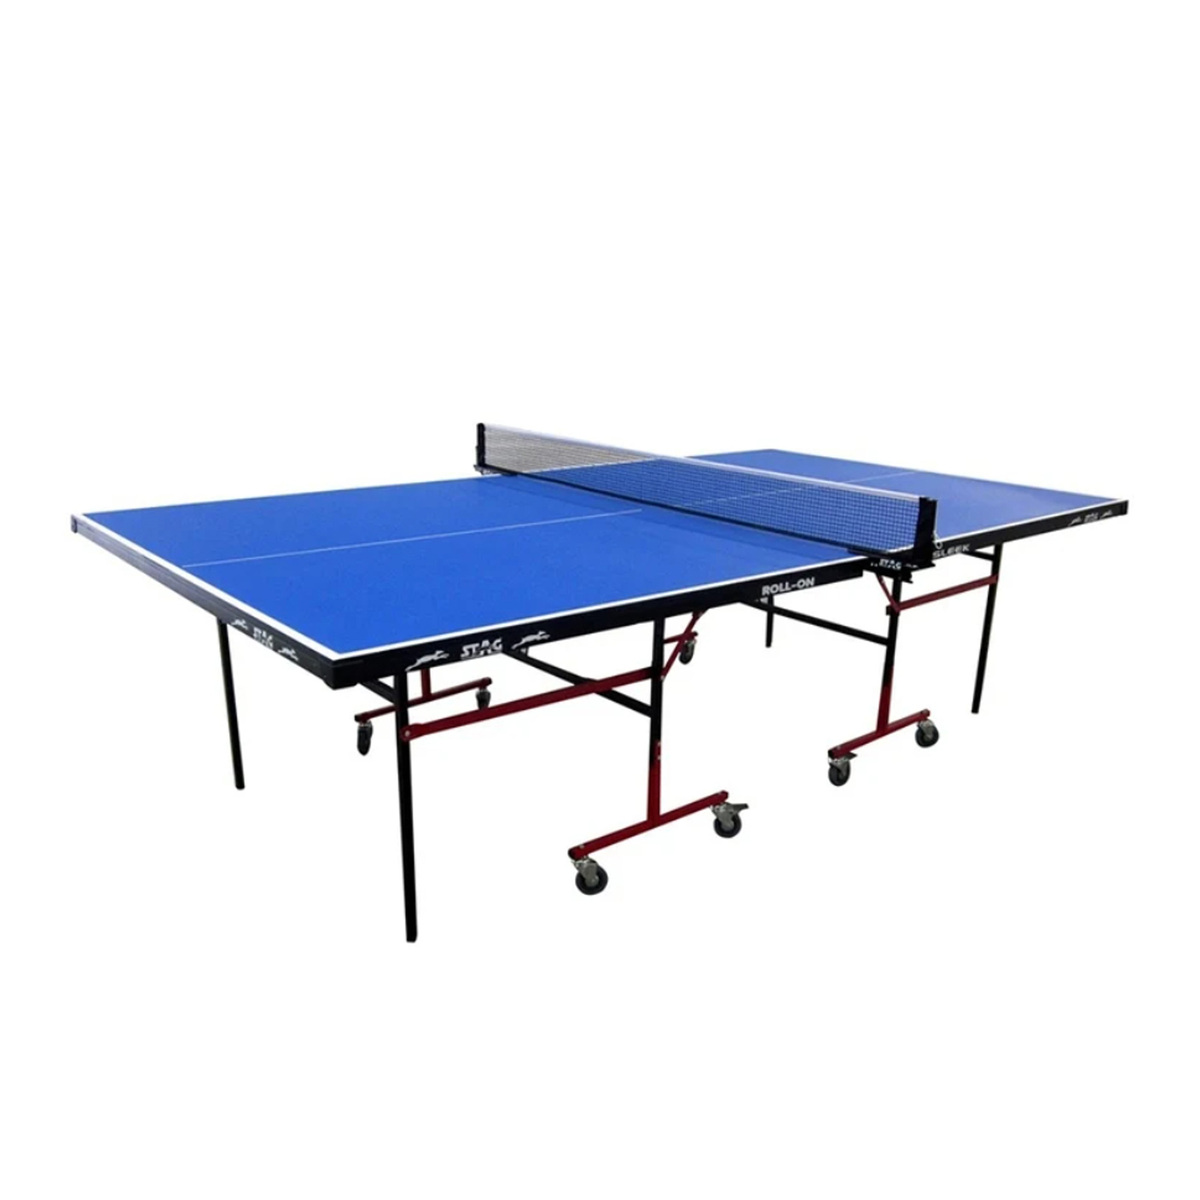 Stag Outdoor Rollaway Table Tennis Table with Compreg Top, 25 x 40 mm, Blue/Black, TTOU-60